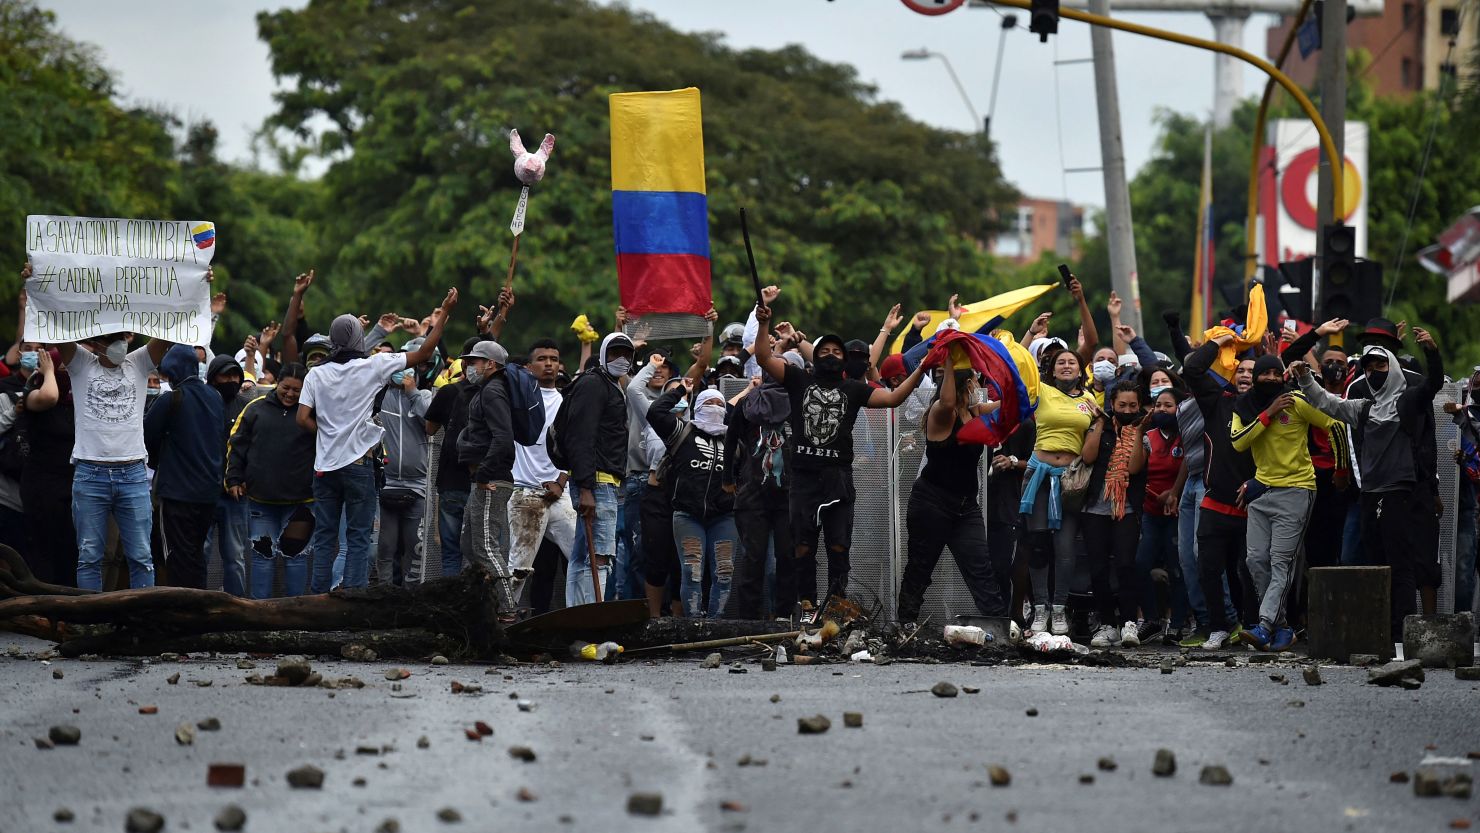 Demonstrators shout towards riot police officers during clashes in Cali, Colombia, on April 30, 2021. 